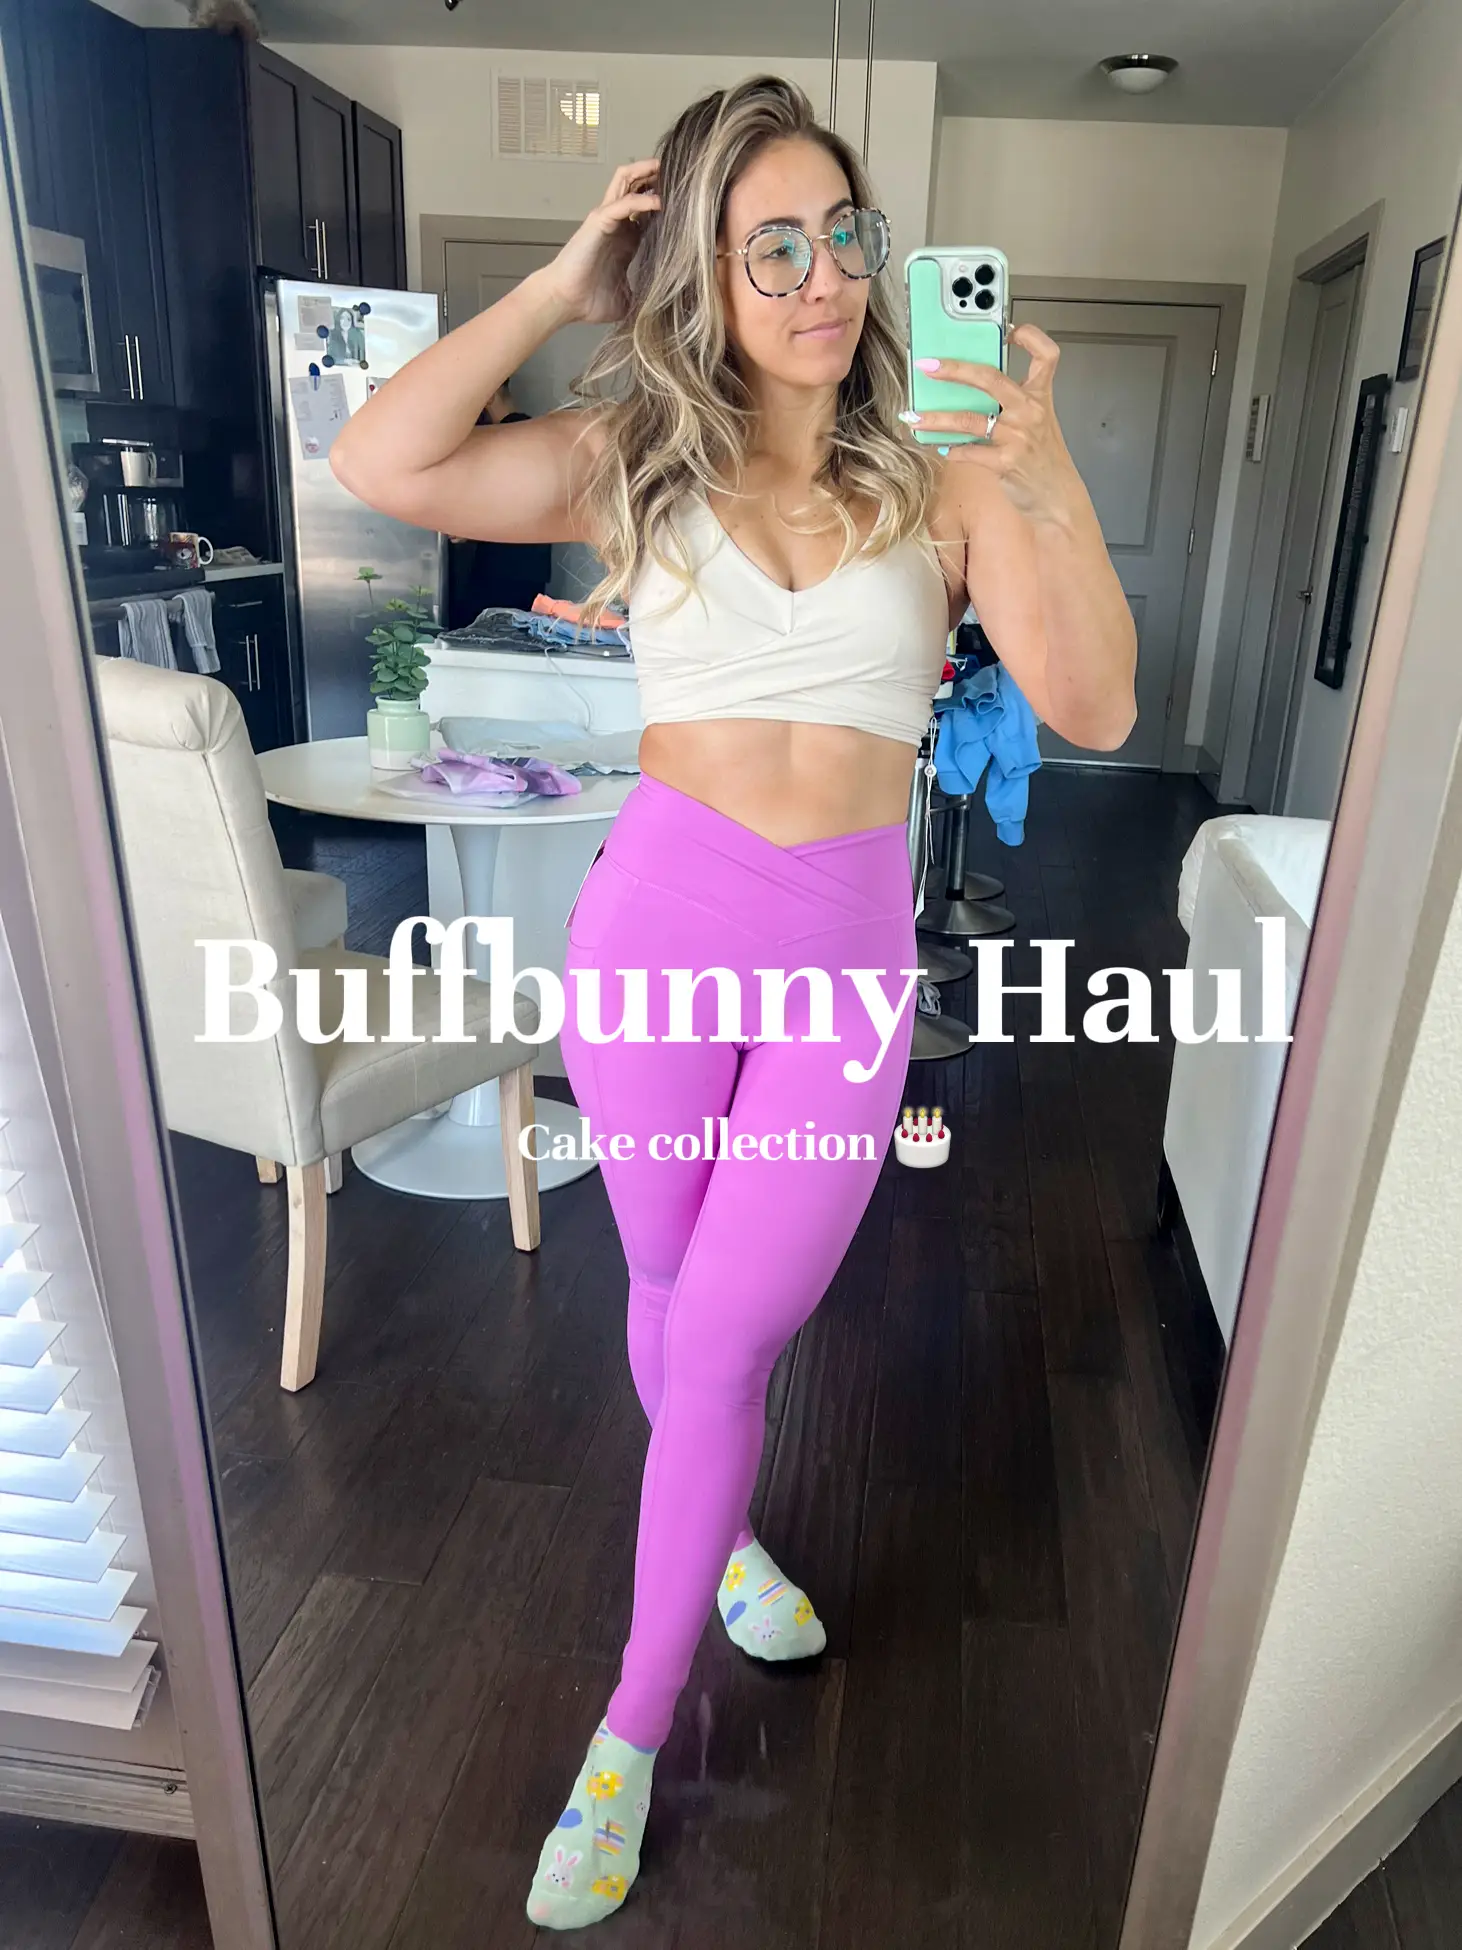 The best view comes after the - Buffbunny Collection